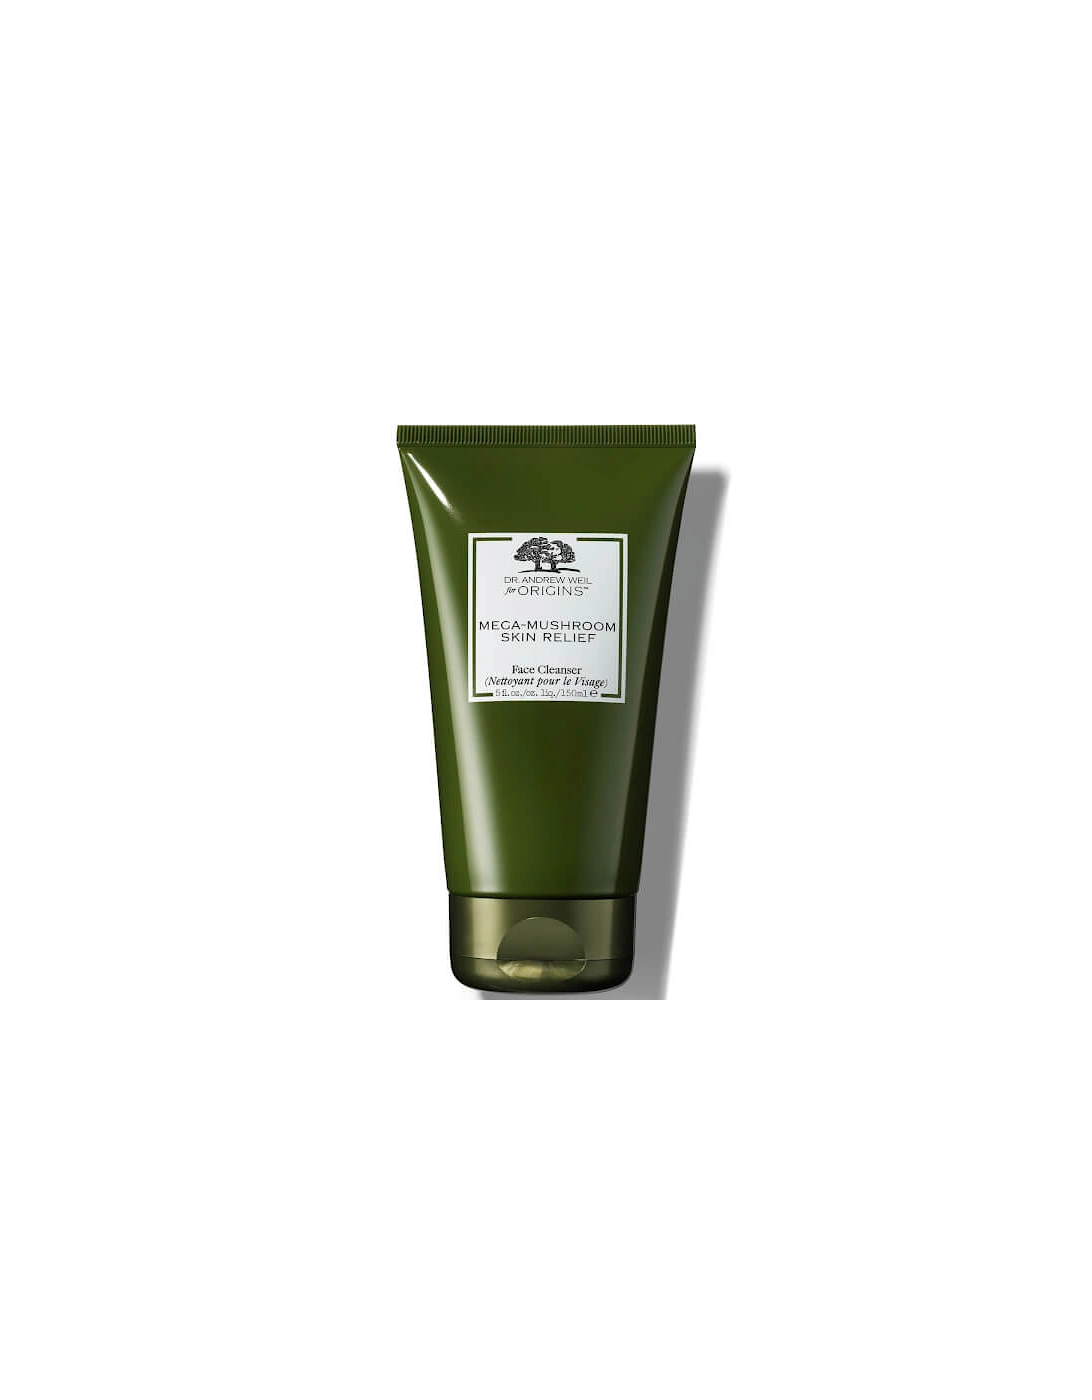 Dr. Andrew Weil for Mega-Mushroom Skin Relief Face Cleanser 150ml, 2 of 1